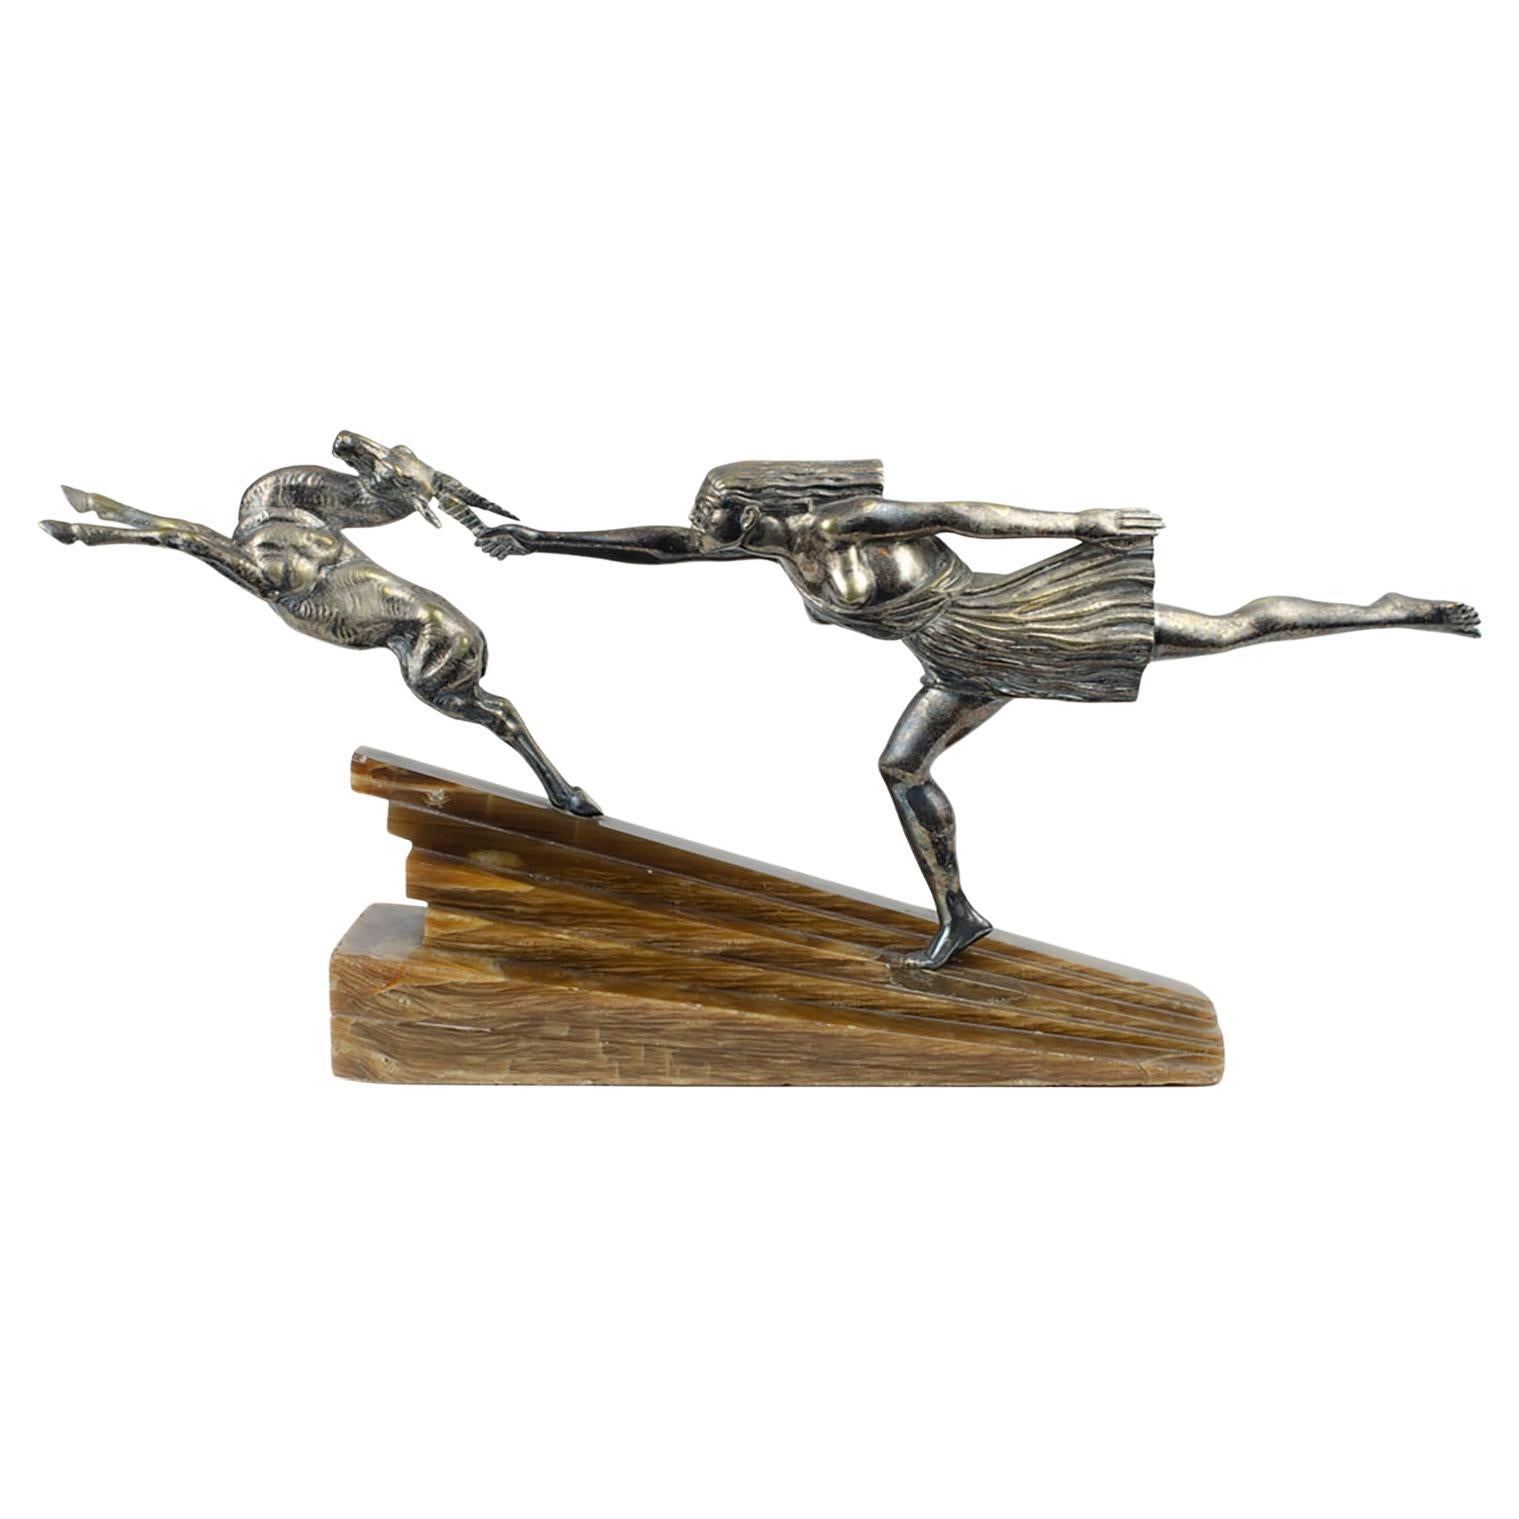  Bronze Art Deco, Statue by Aurore Onu "Chasing the Hind" For Sale